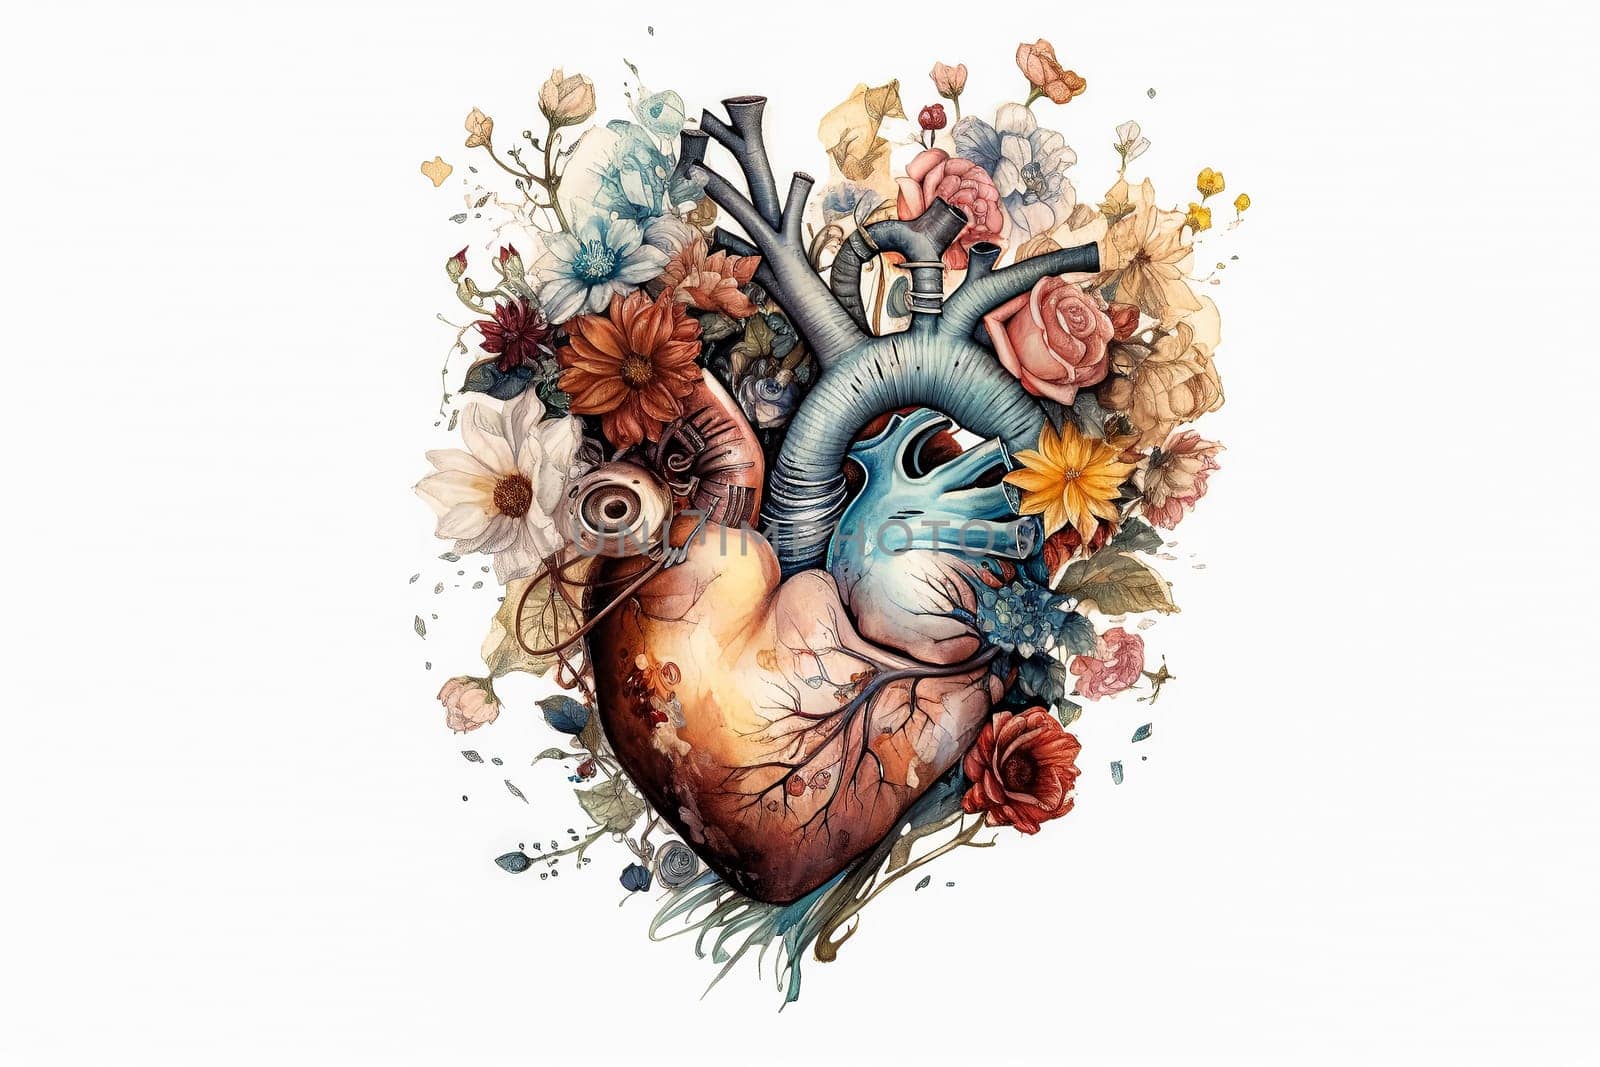 a watercolor illustration featuring heart shaped flowers by Alla_Morozova93